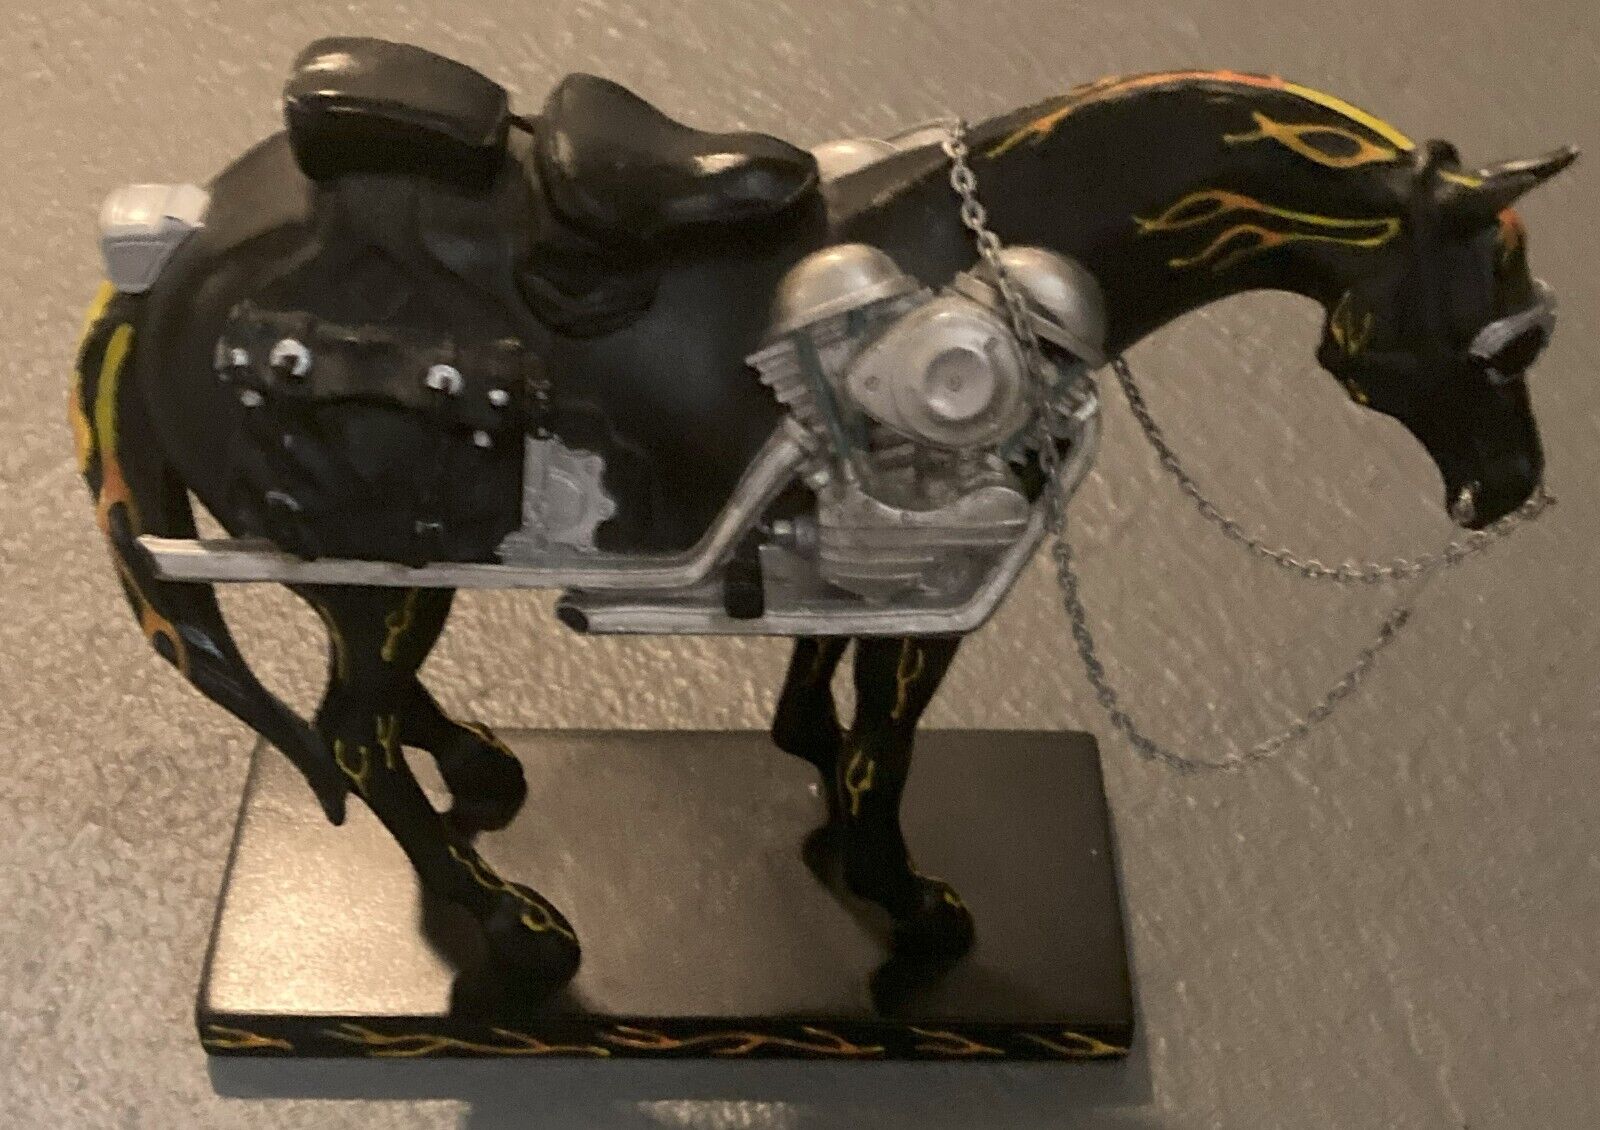 Trail of Painted Ponies Collectible “Harley Davidson” RETIRED FIGURINE BLACK